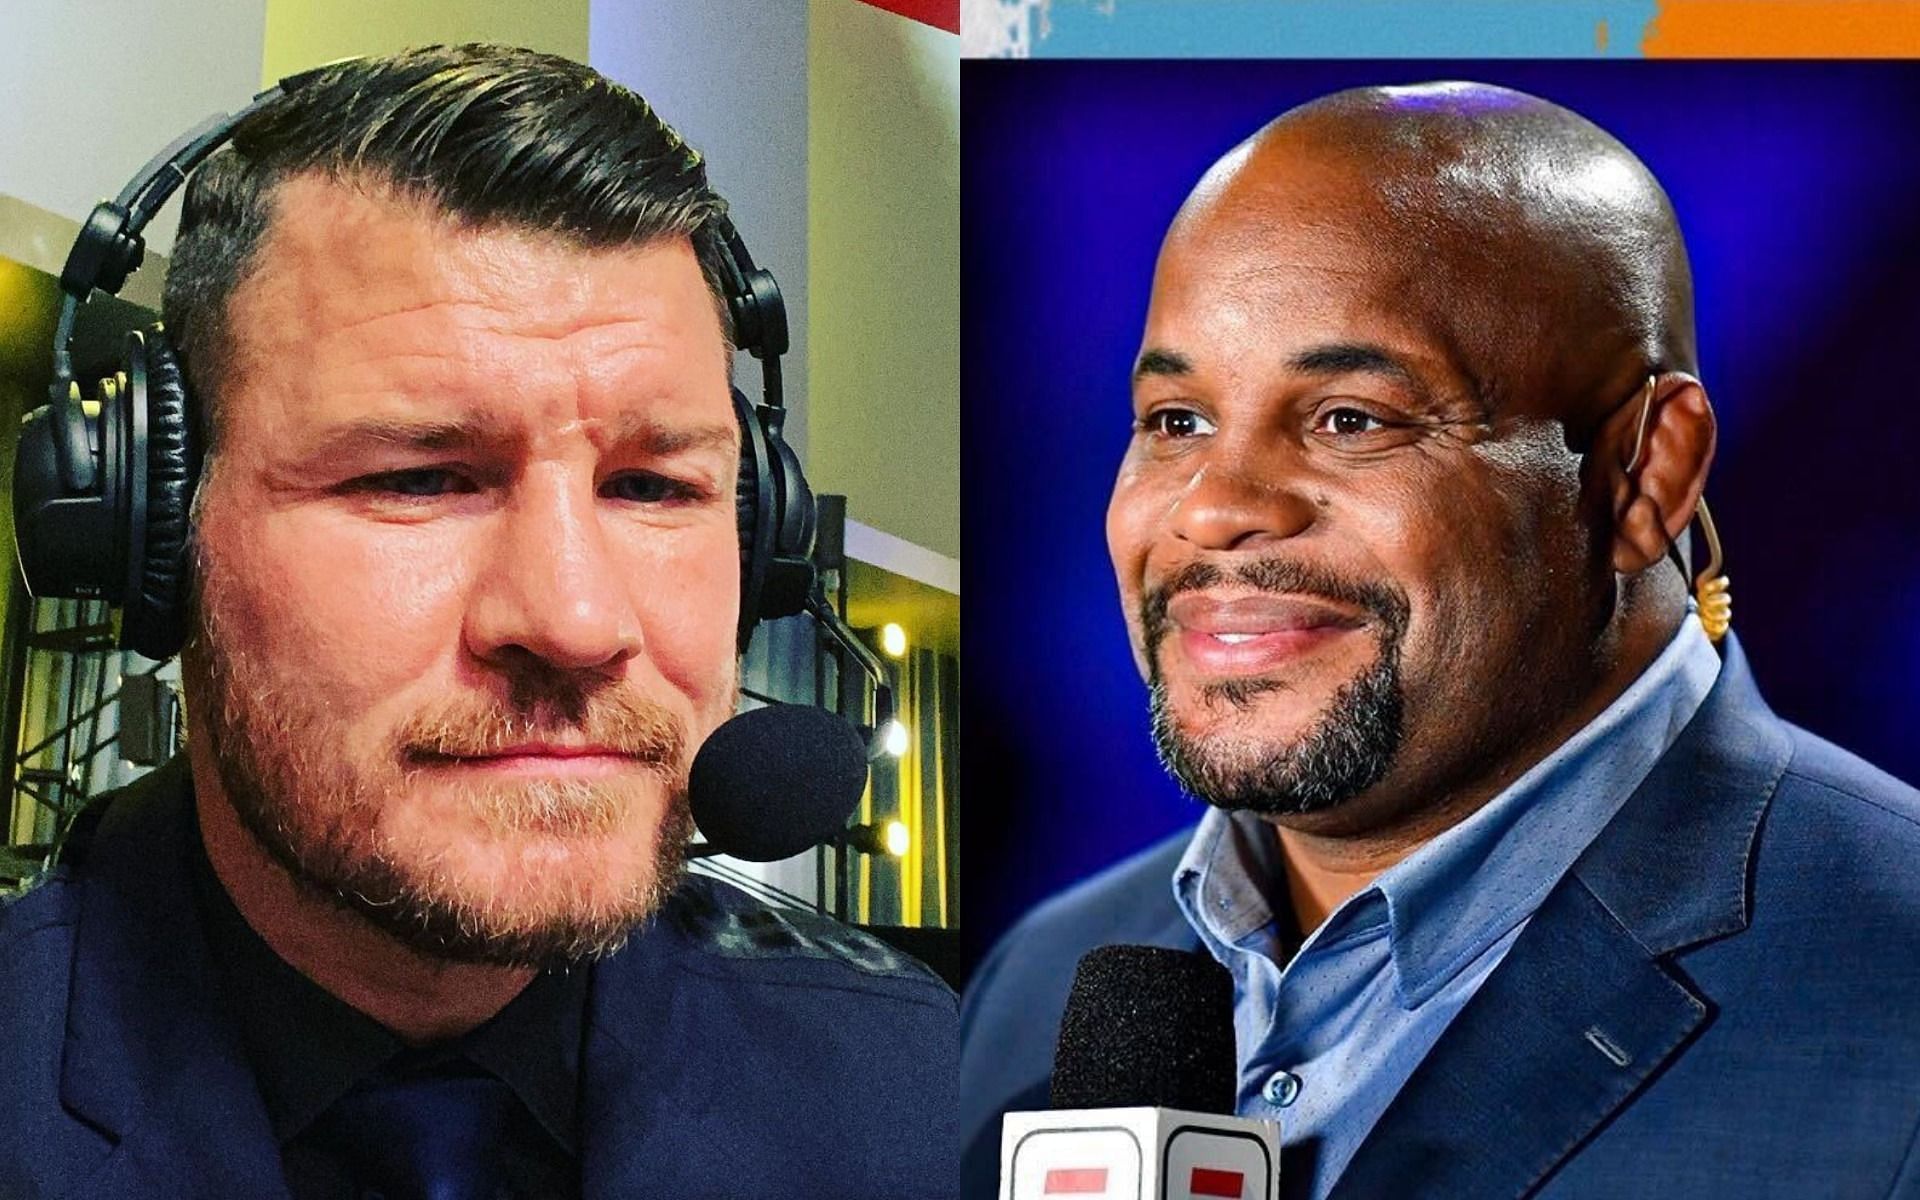 Michael Bisping (left), Daniel Cormier (right) [Images courtesy: @mikebisping @dc_mma on Instagram]